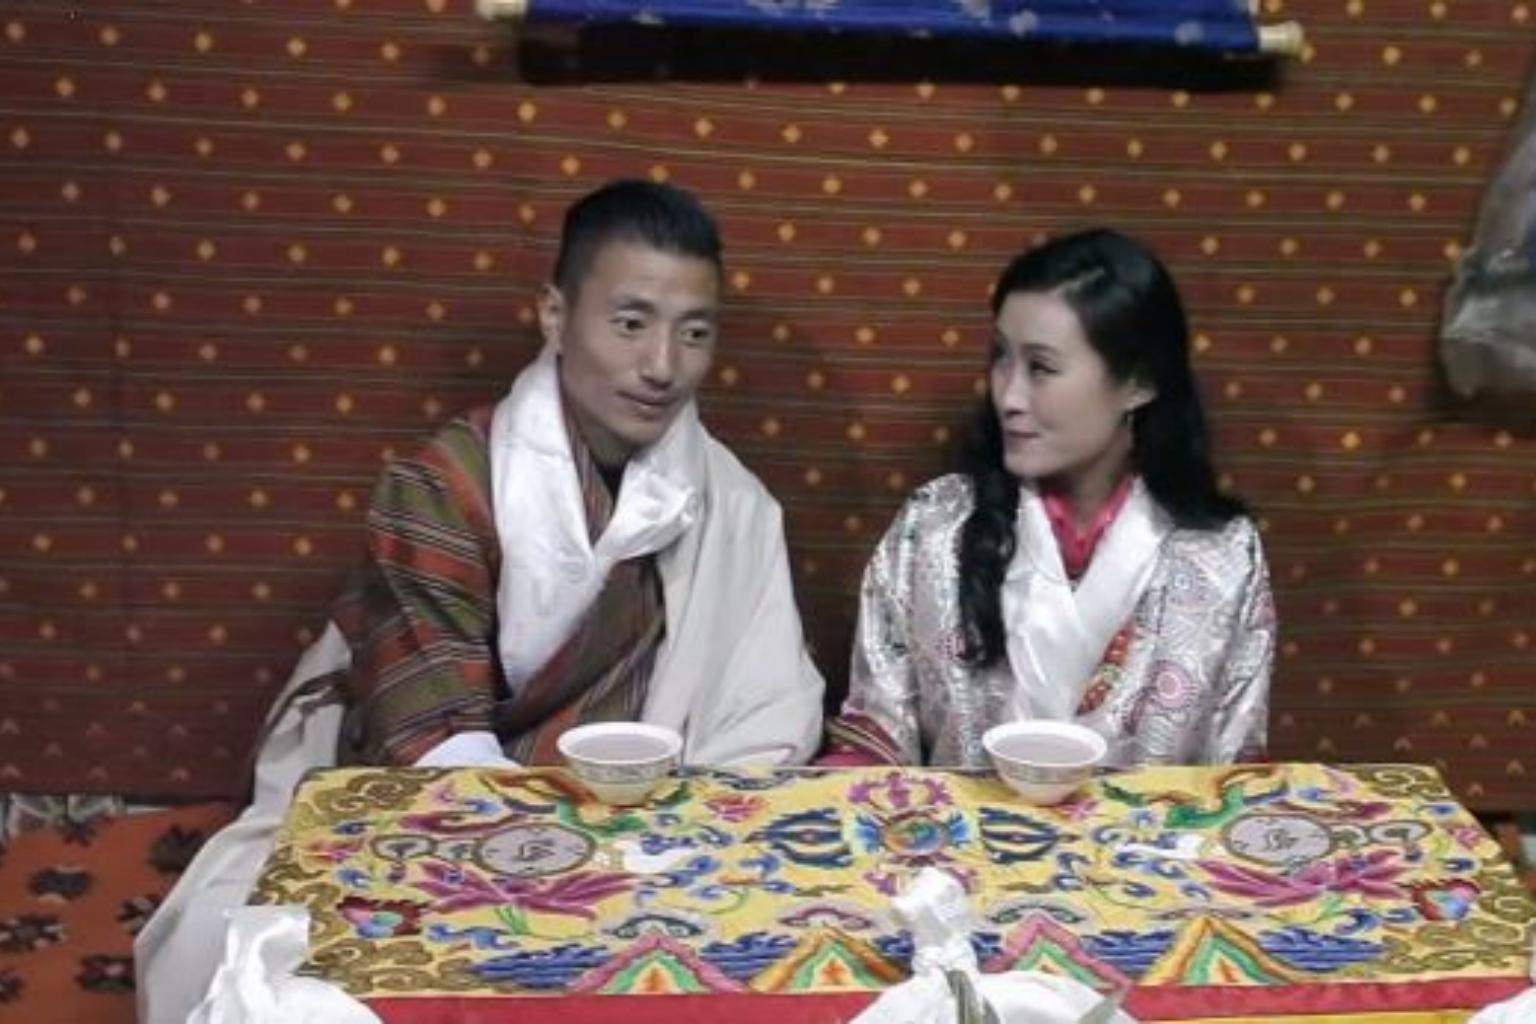 i-went-to-bhutan-on-a-holiday-and-ended-up-marrying-my-guide-the-straits-times-2.jpg